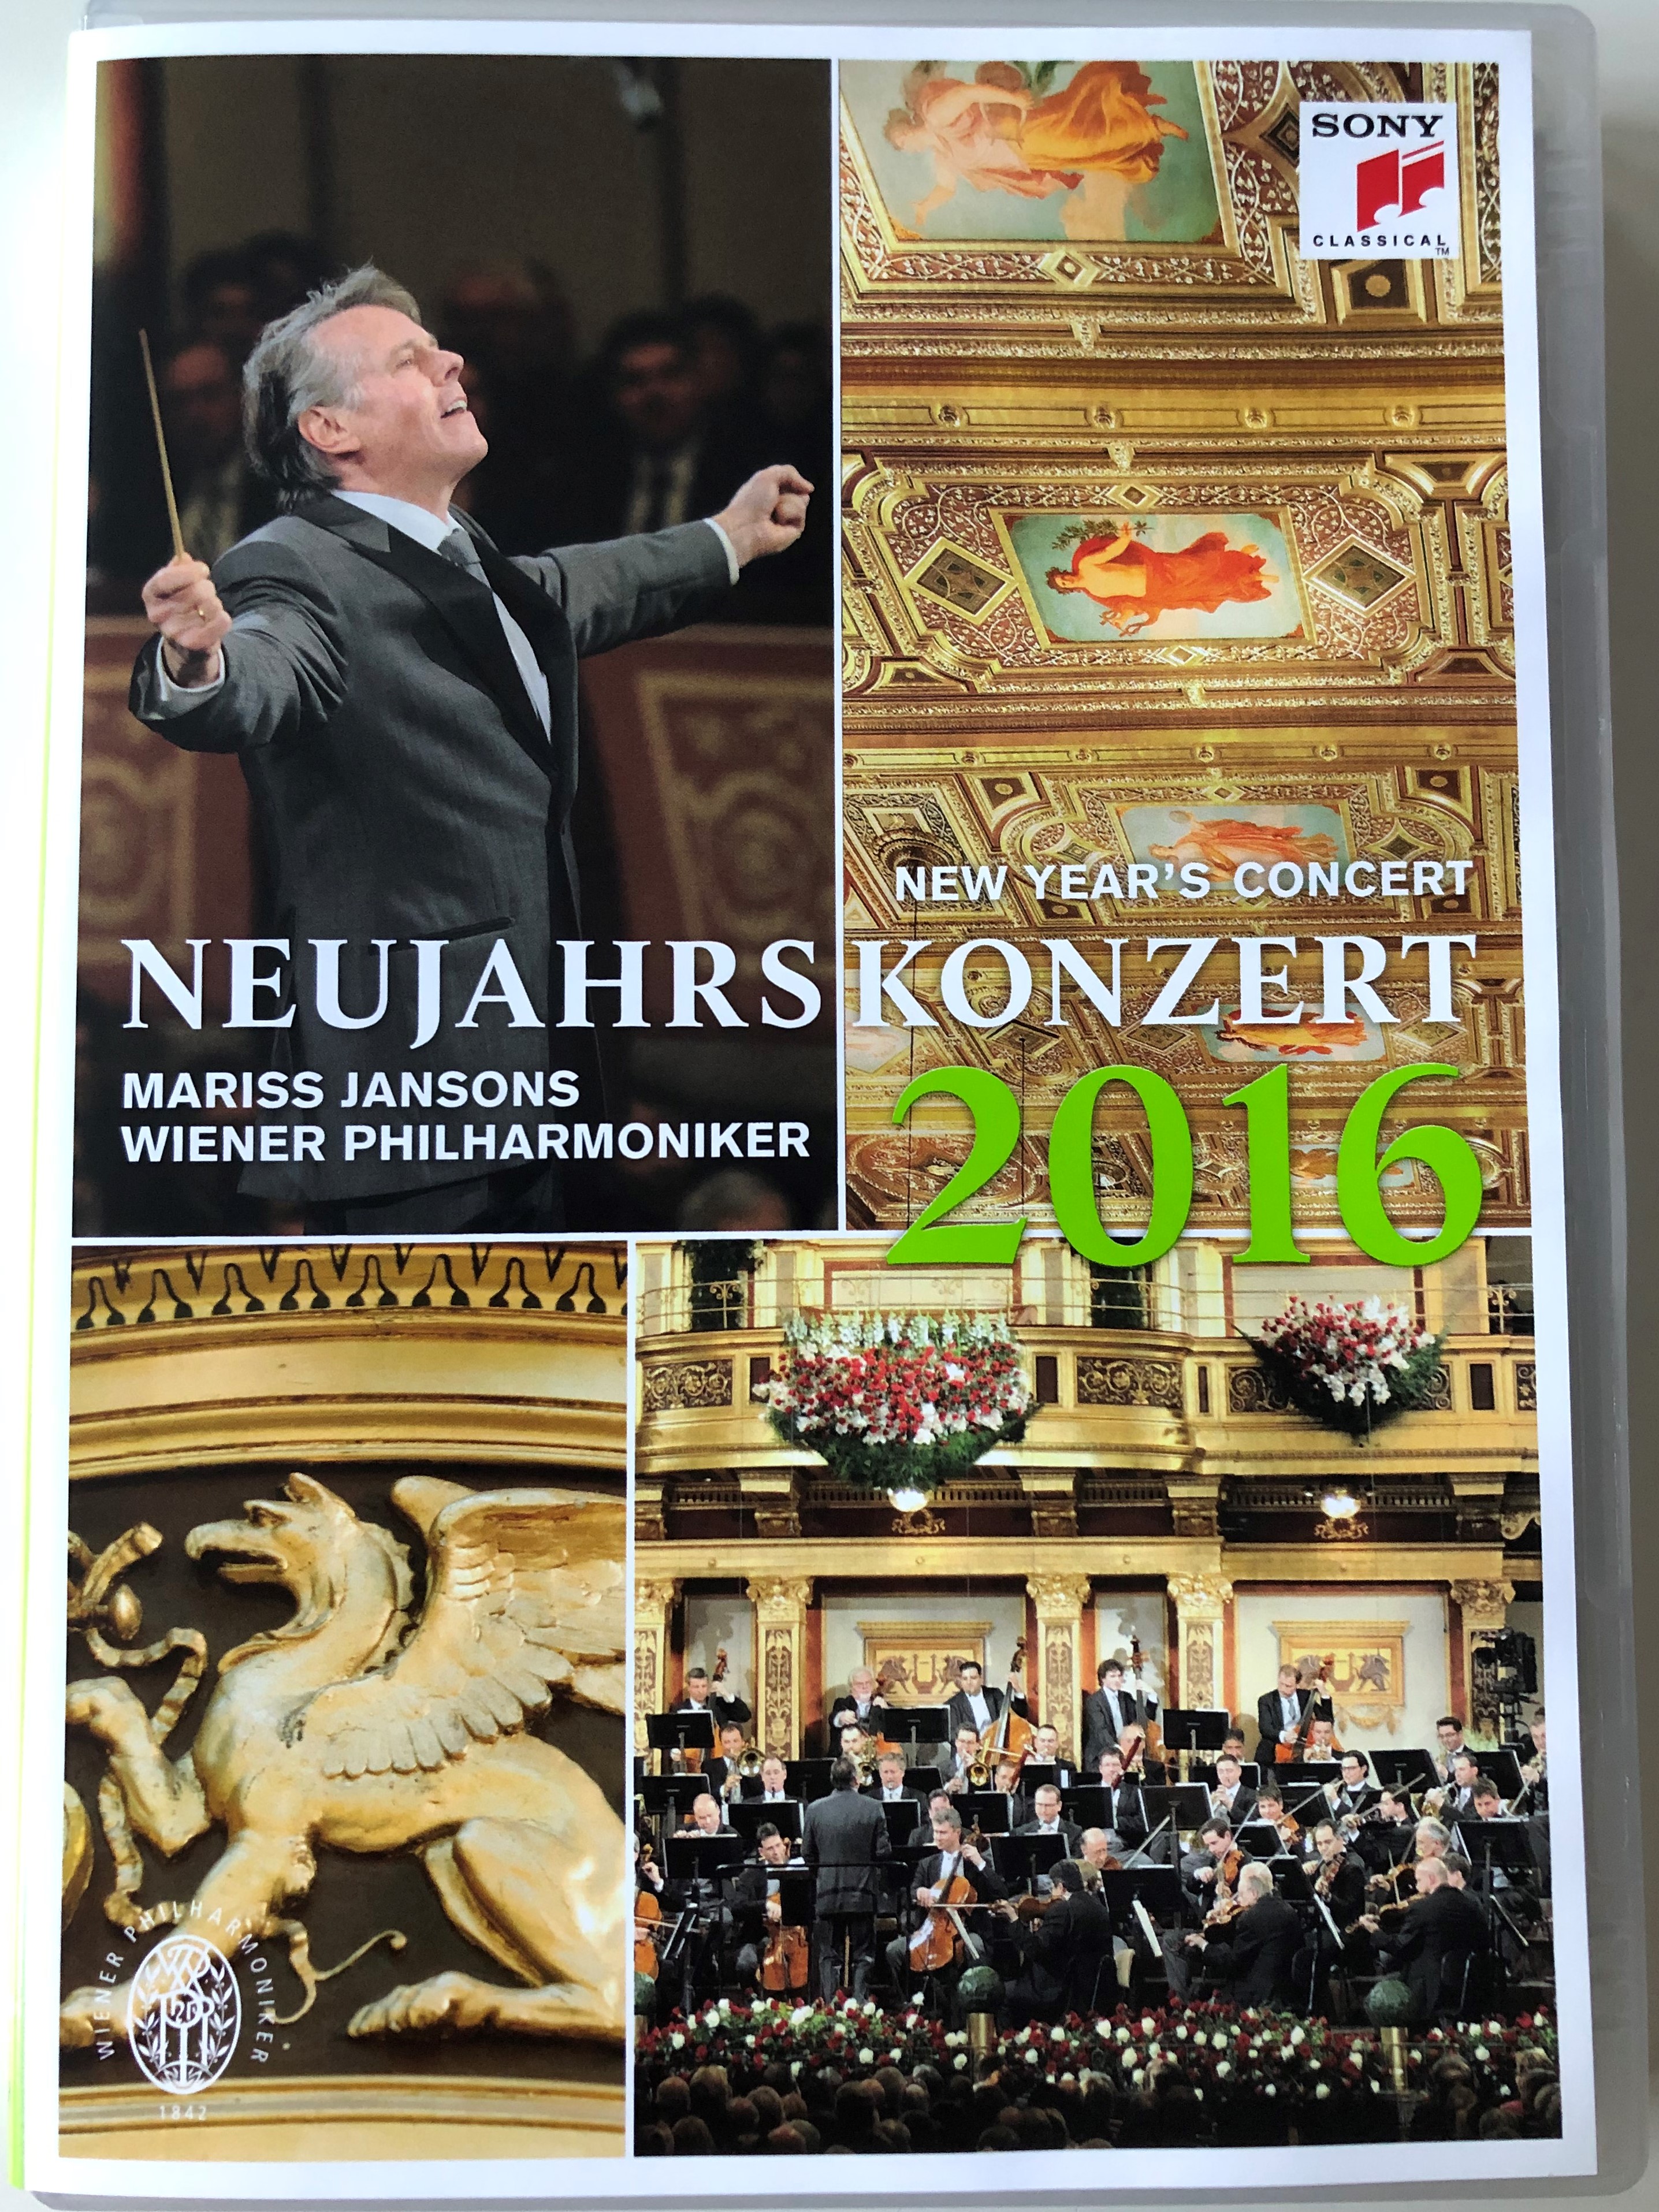 Neujahrskonzert 2016 DVD New Year's Concert / Directed by Michael Beyer /  Conducted by Mariss Jansos / Wiener Philharmoniker / Sony Classical - Bible  in My Language